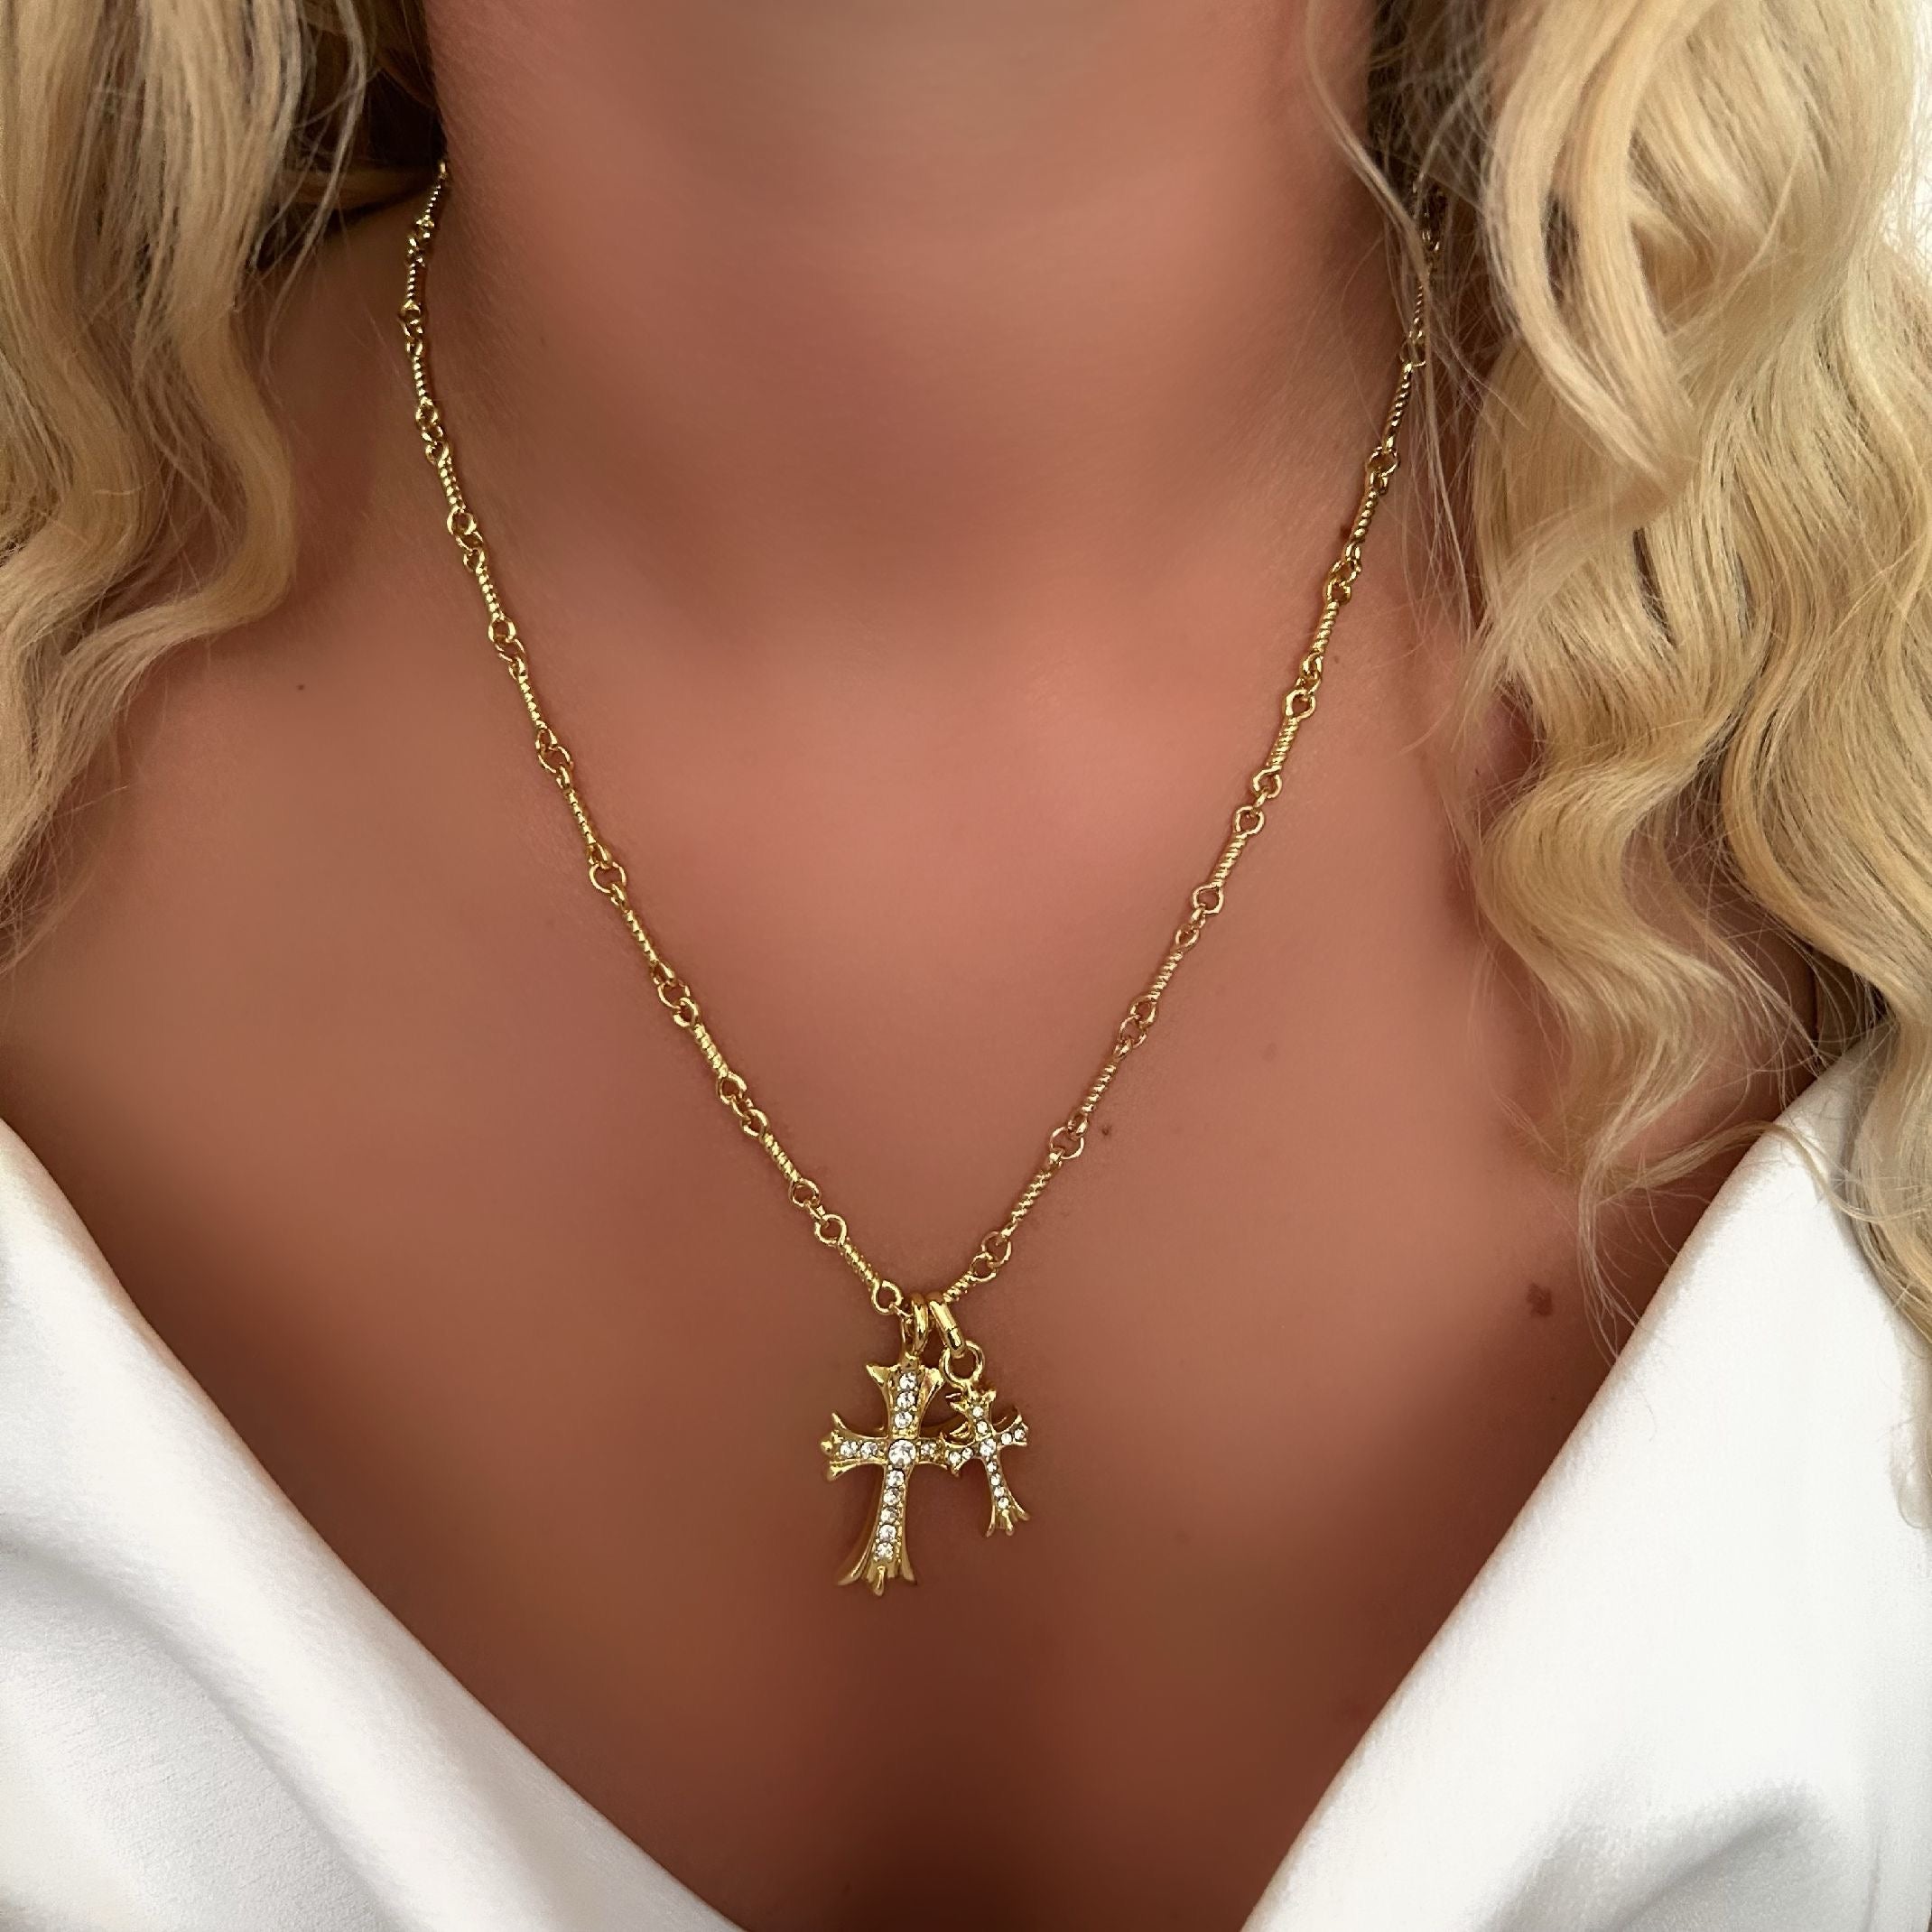 The Double Cross Necklace | By Evette Santos